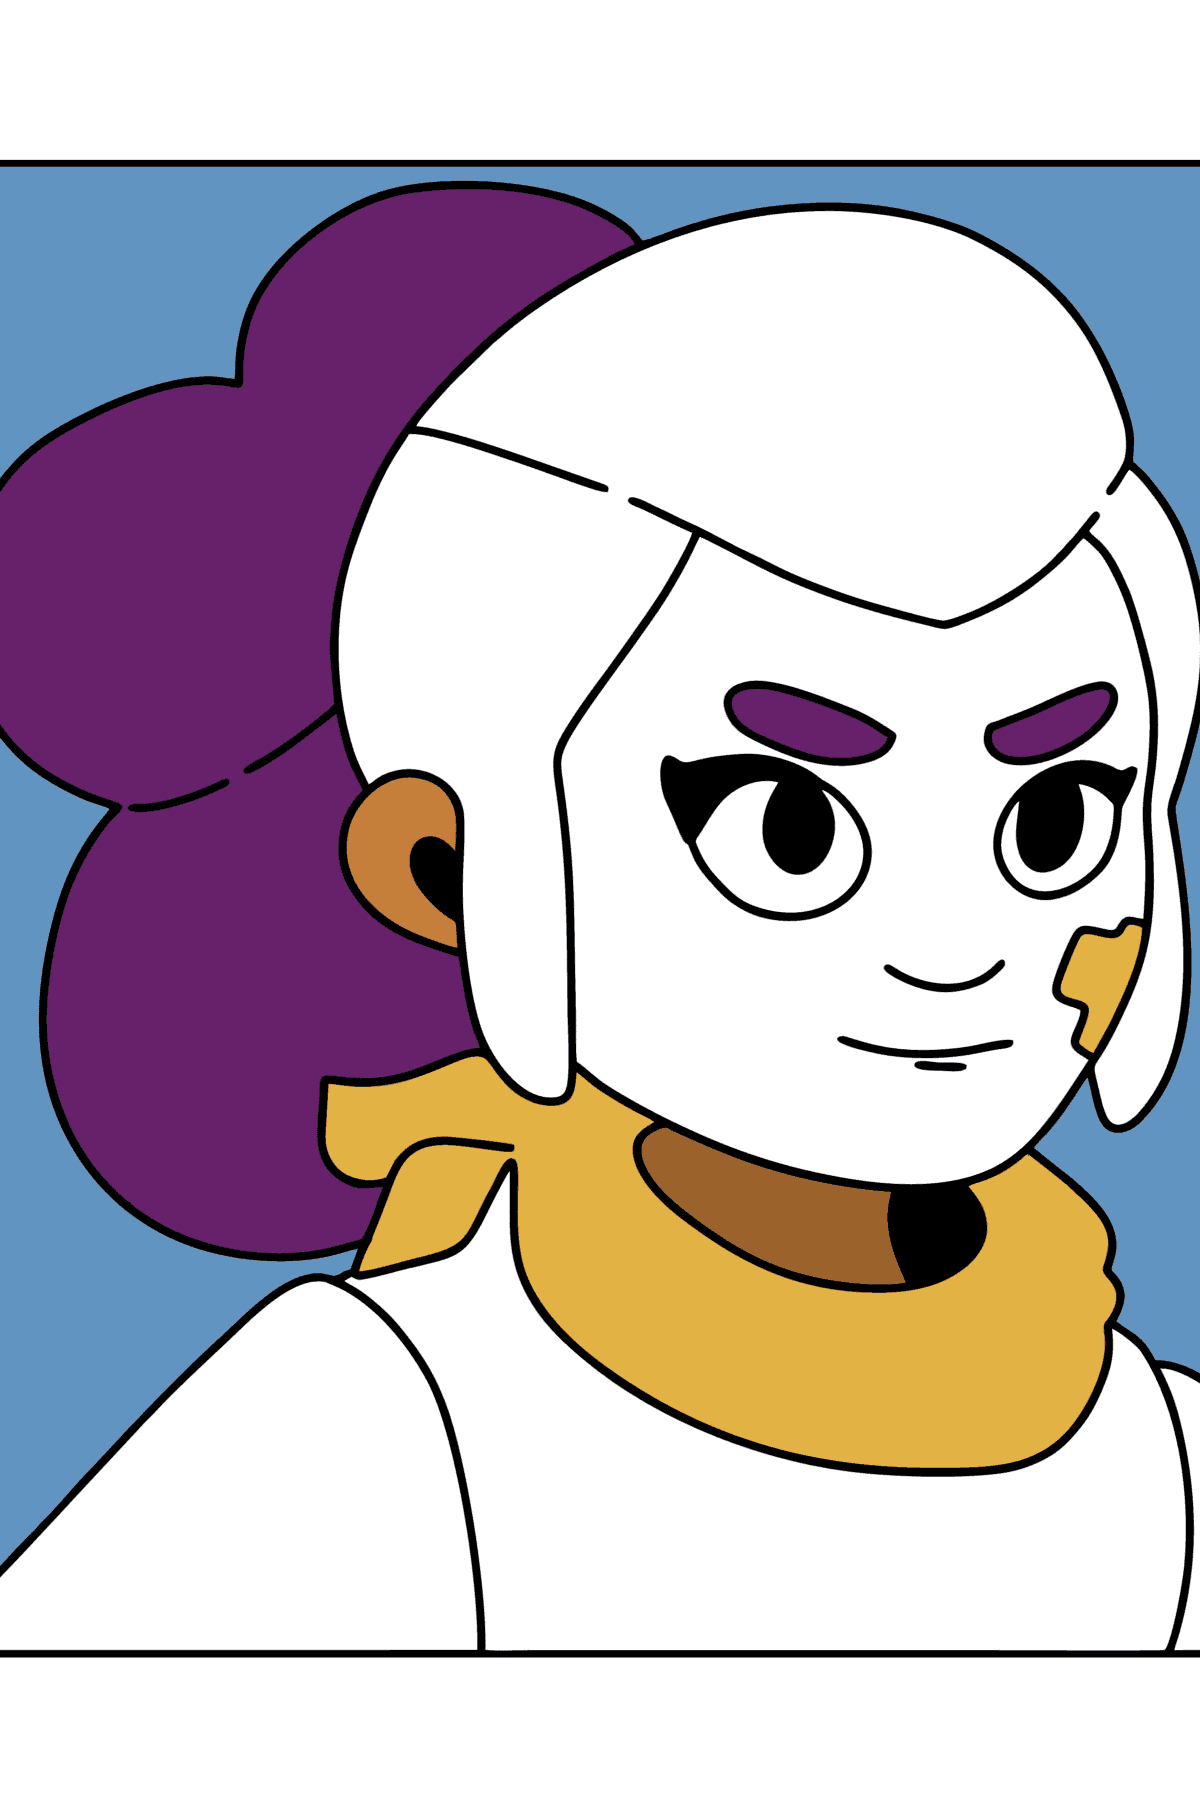 Brawl Stars Shelly coloring page - Coloring Pages for Kids